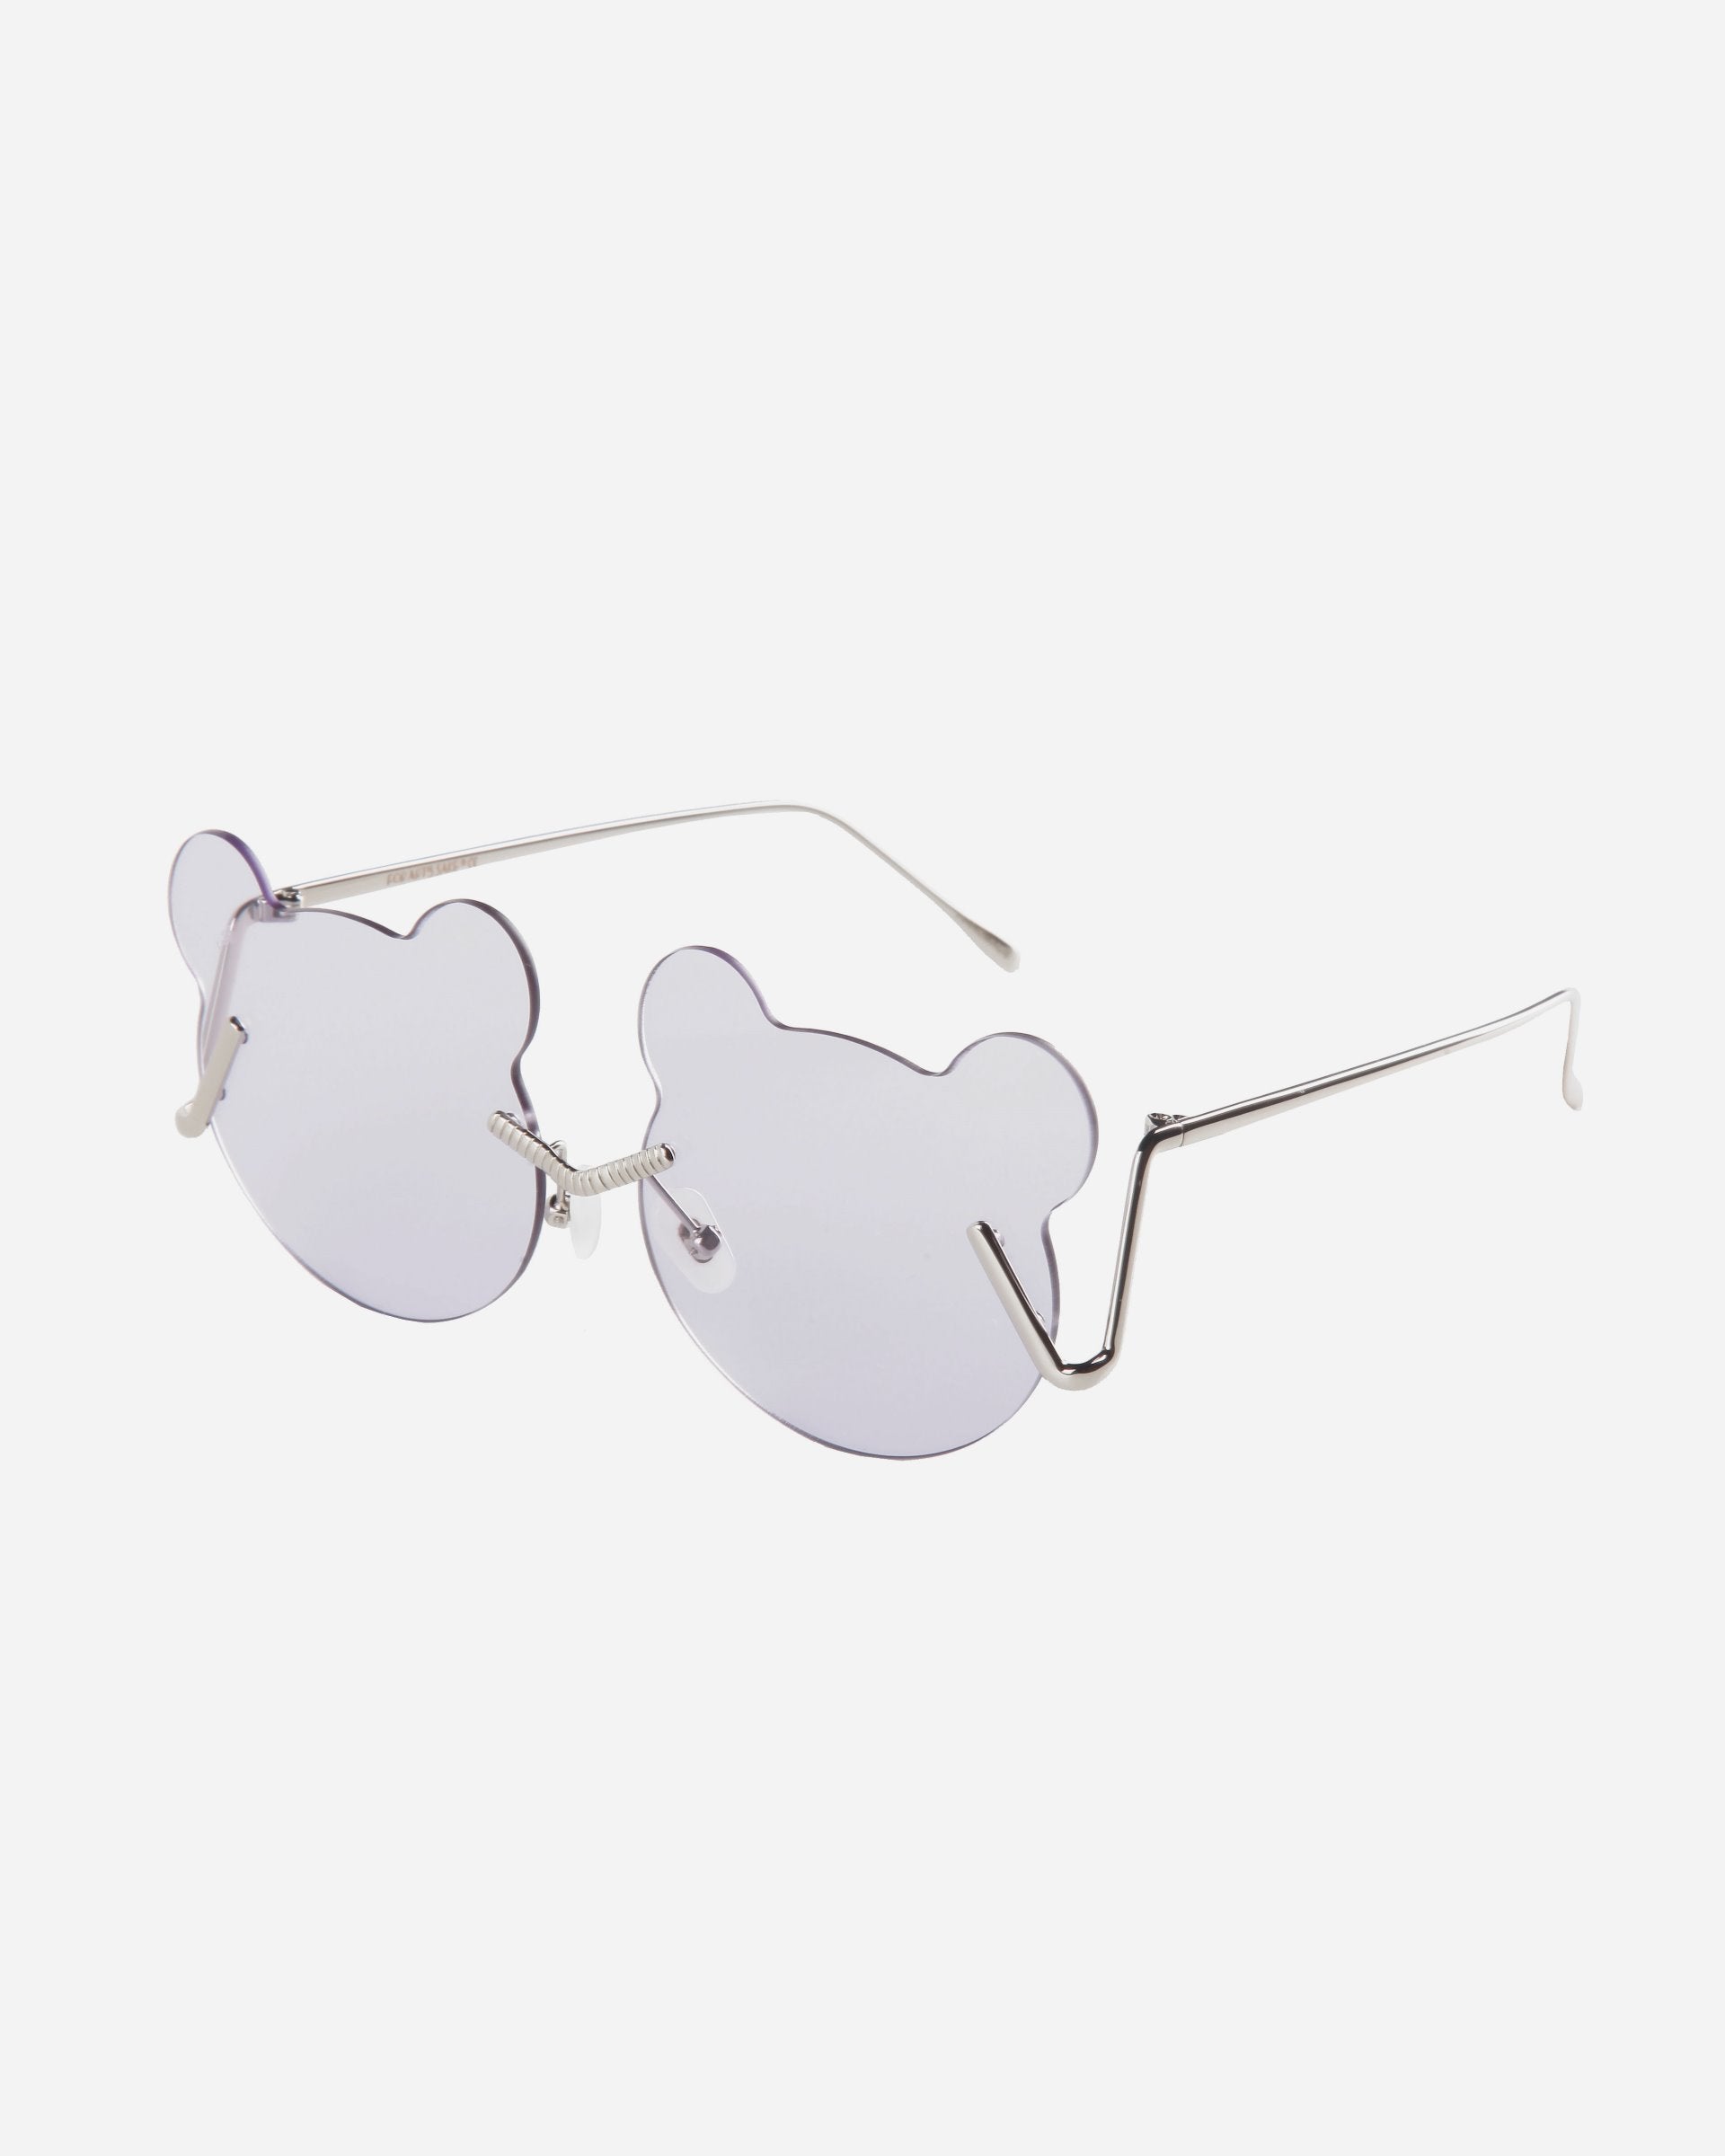 A pair of For Art&#39;s Sake® Teddy sunglasses with lenses shaped like bear heads. The lenses offer UV protection and are lightly tinted purple. The frames, made of thin, stainless steel metal, feature adjustable nosepads for comfort. The side arms of the glasses are straight with a slight curve at the ends. The background is plain white.